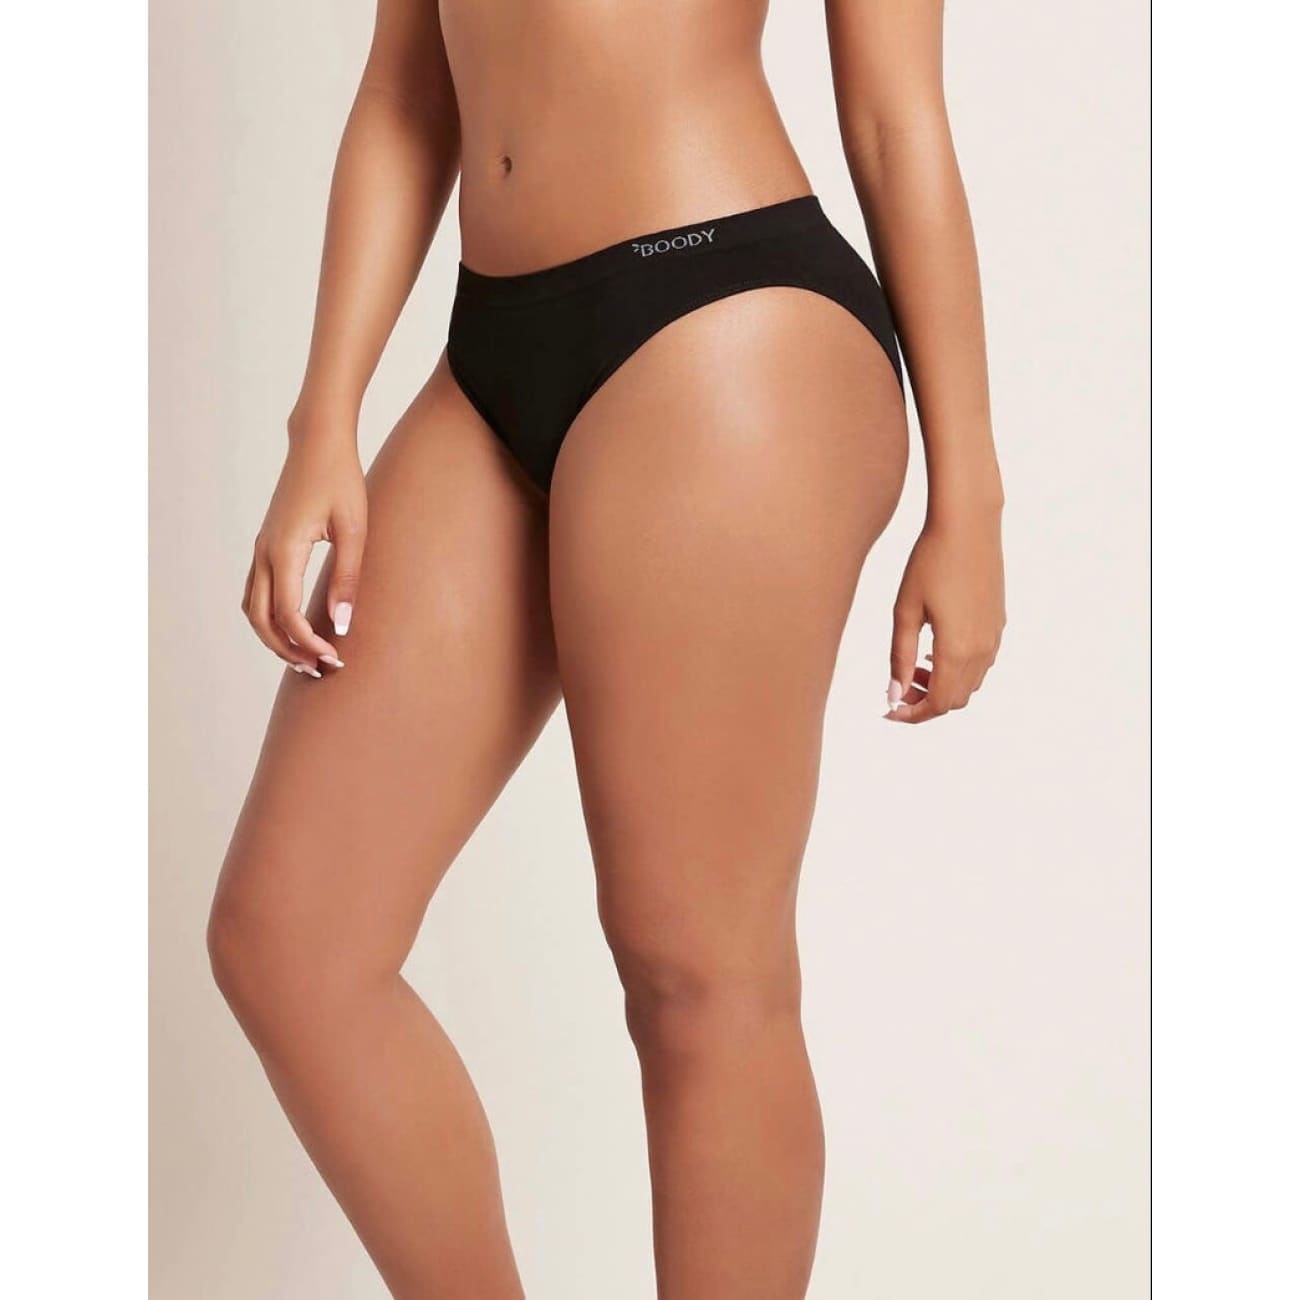 CLASSIC BIKINI UNDERWEAR STYLE WITH A FLAWLESS SMOOTH FIT. Rock Chocs 